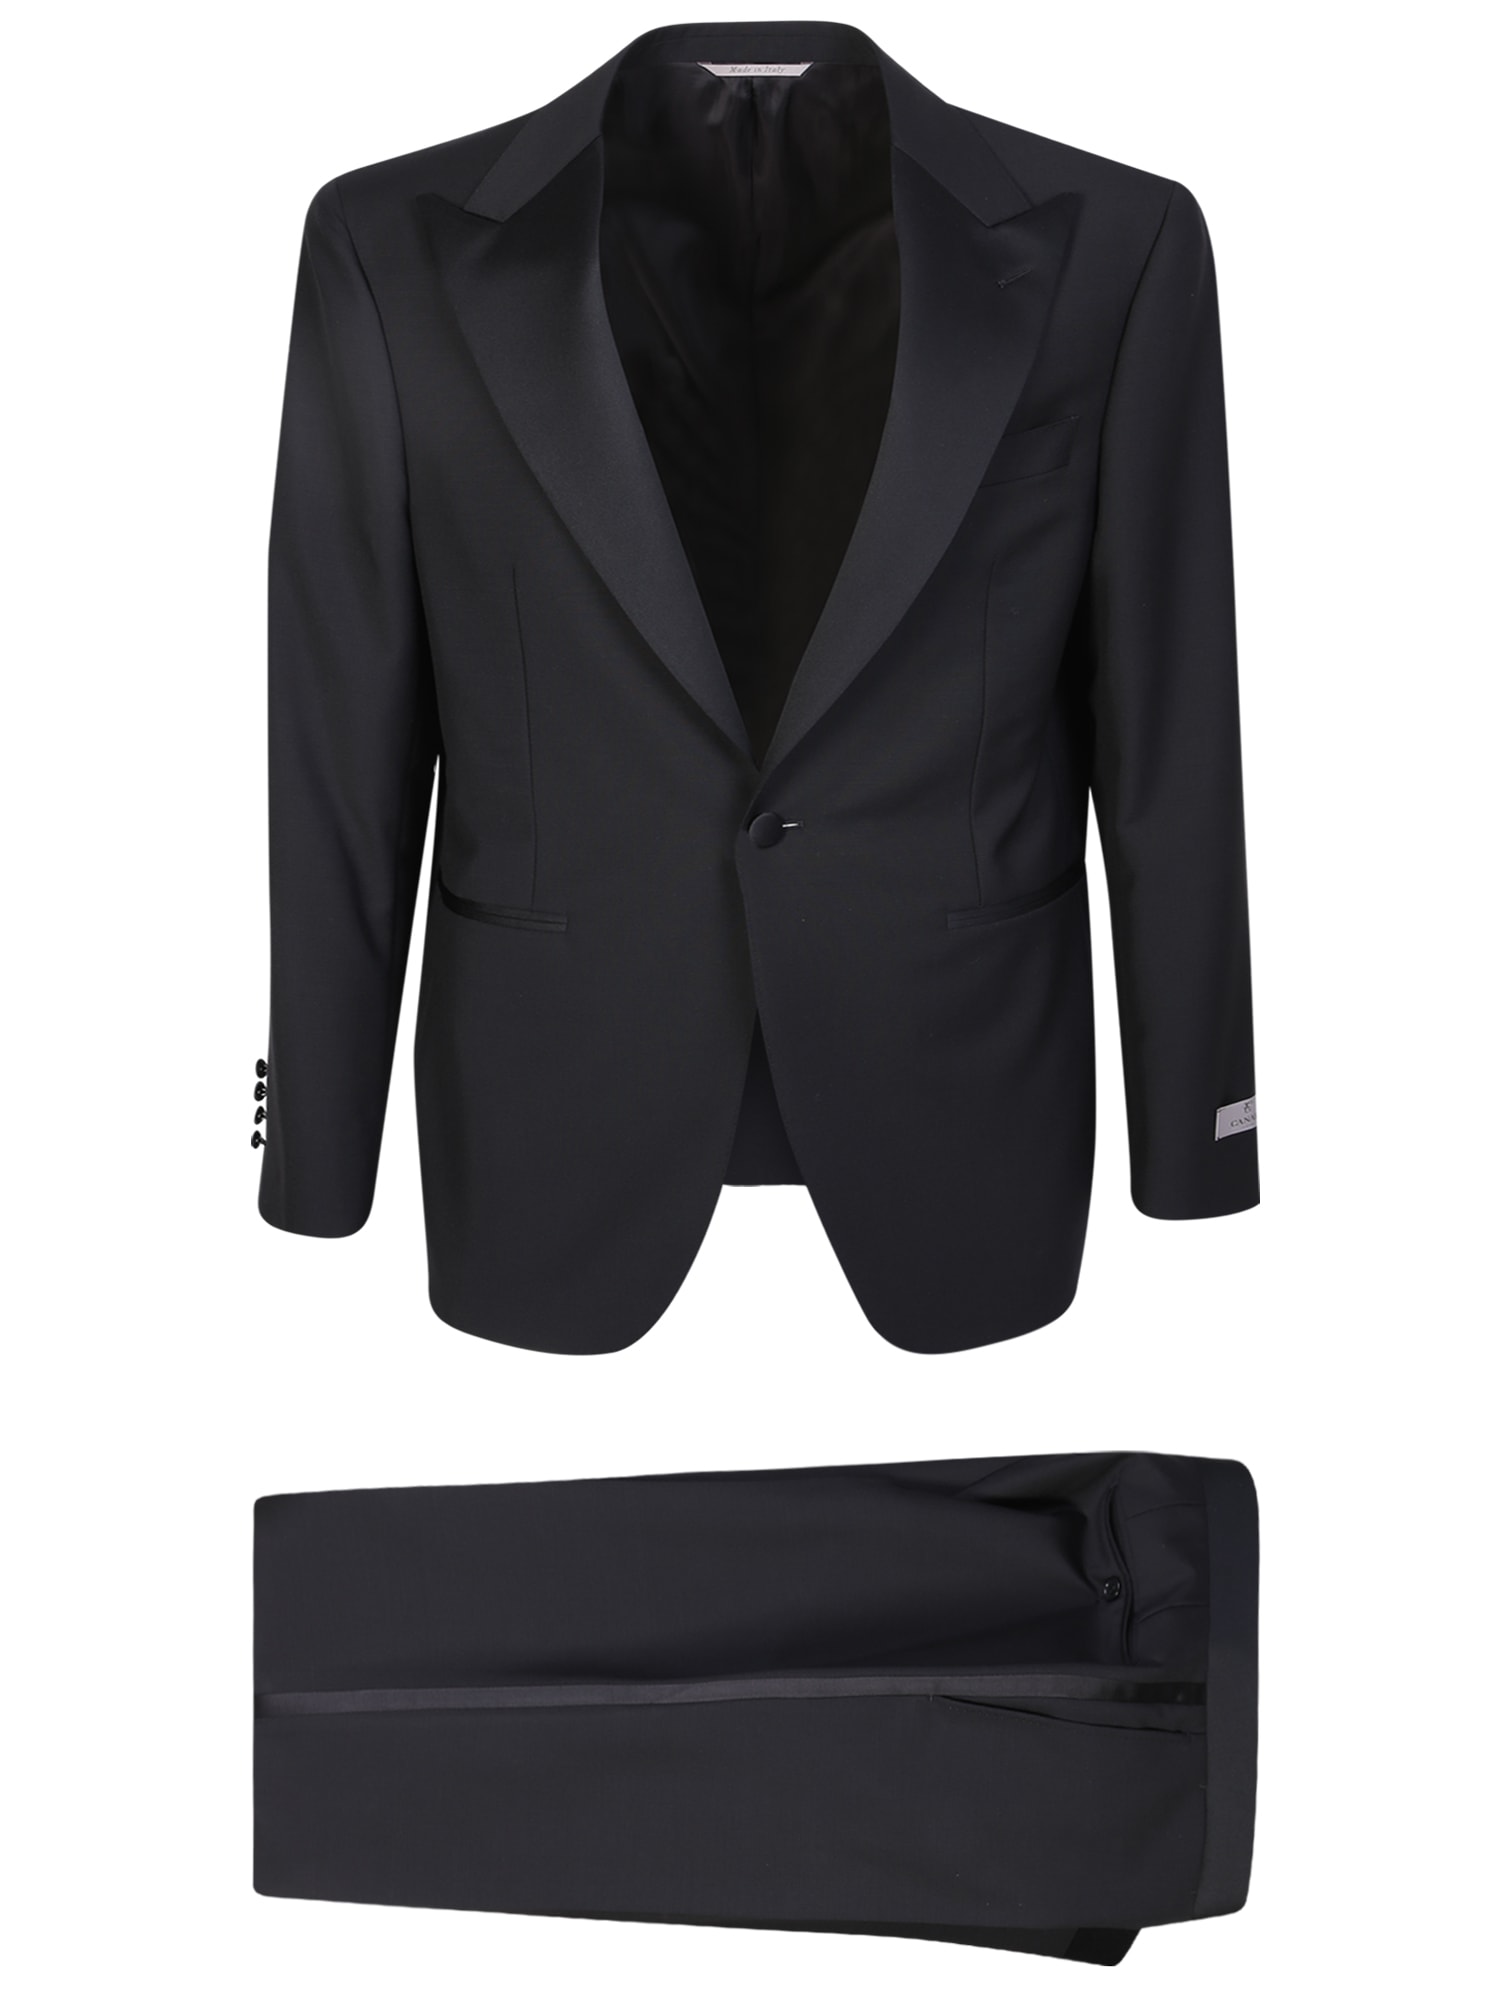 CANALI SINGLE BREASTED BLACK SUIT